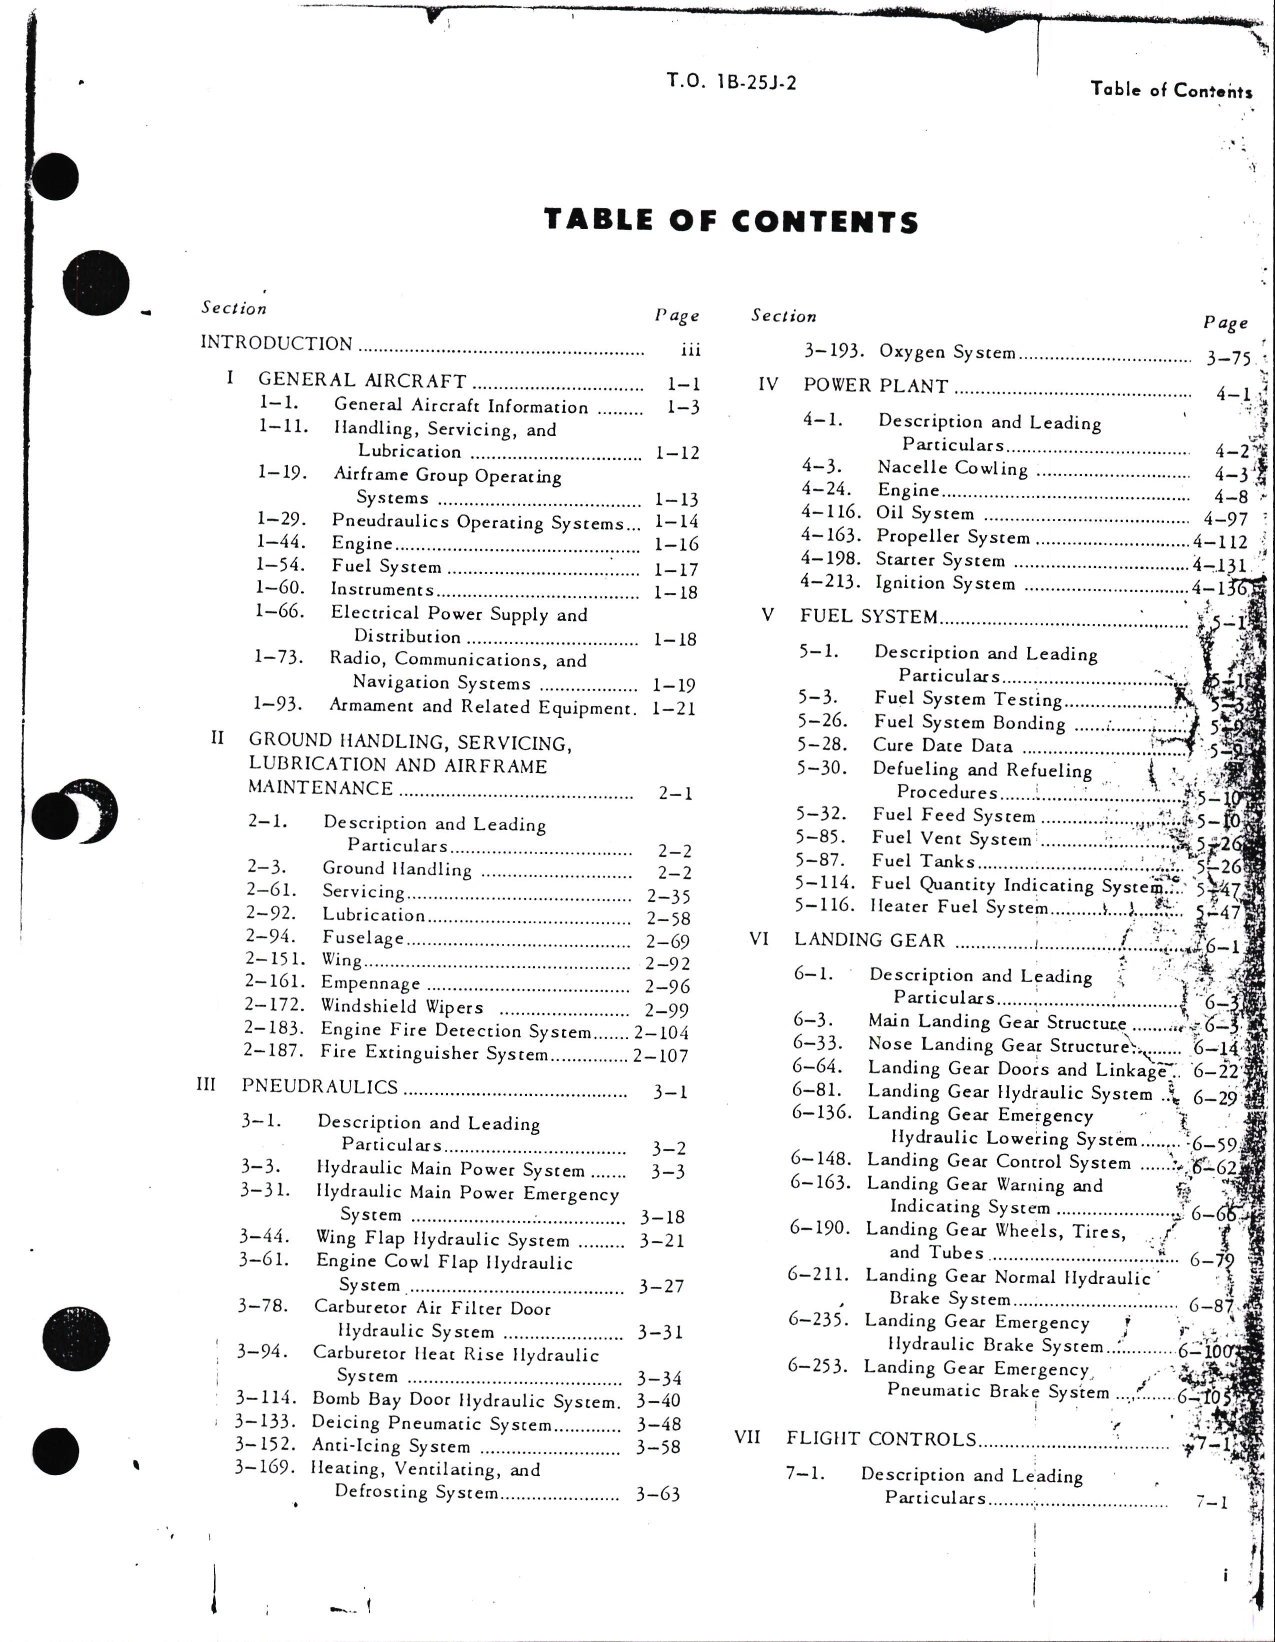 Sample page 5 from AirCorps Library document: Maintenance Instructions for B-25J, TB-25J, TB-25L, TB-25L-1, and TB-25N